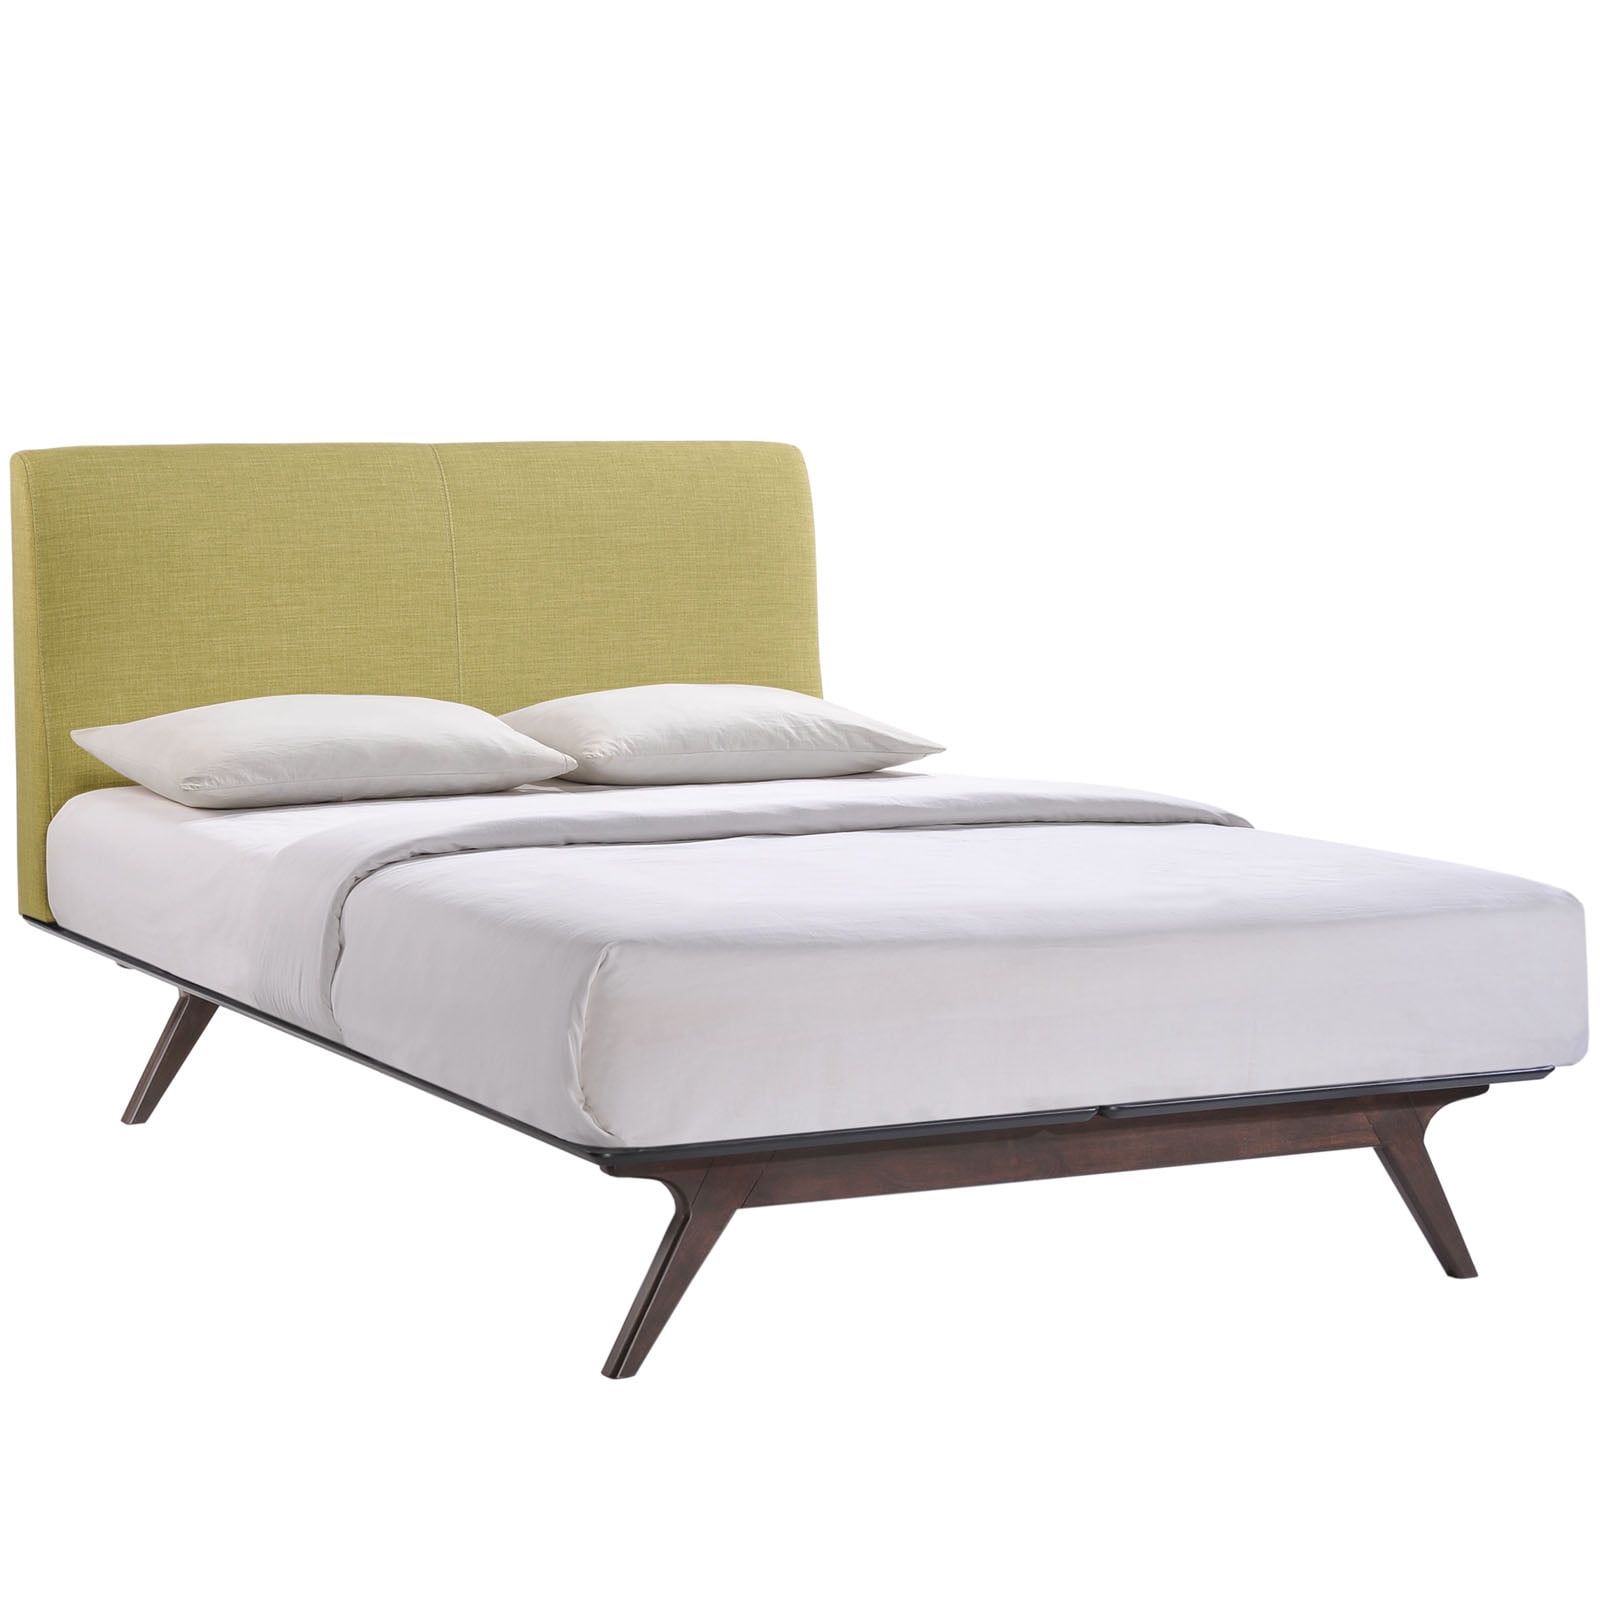 Mid-Century Modern Queen Bed with Tufted Green Upholstery